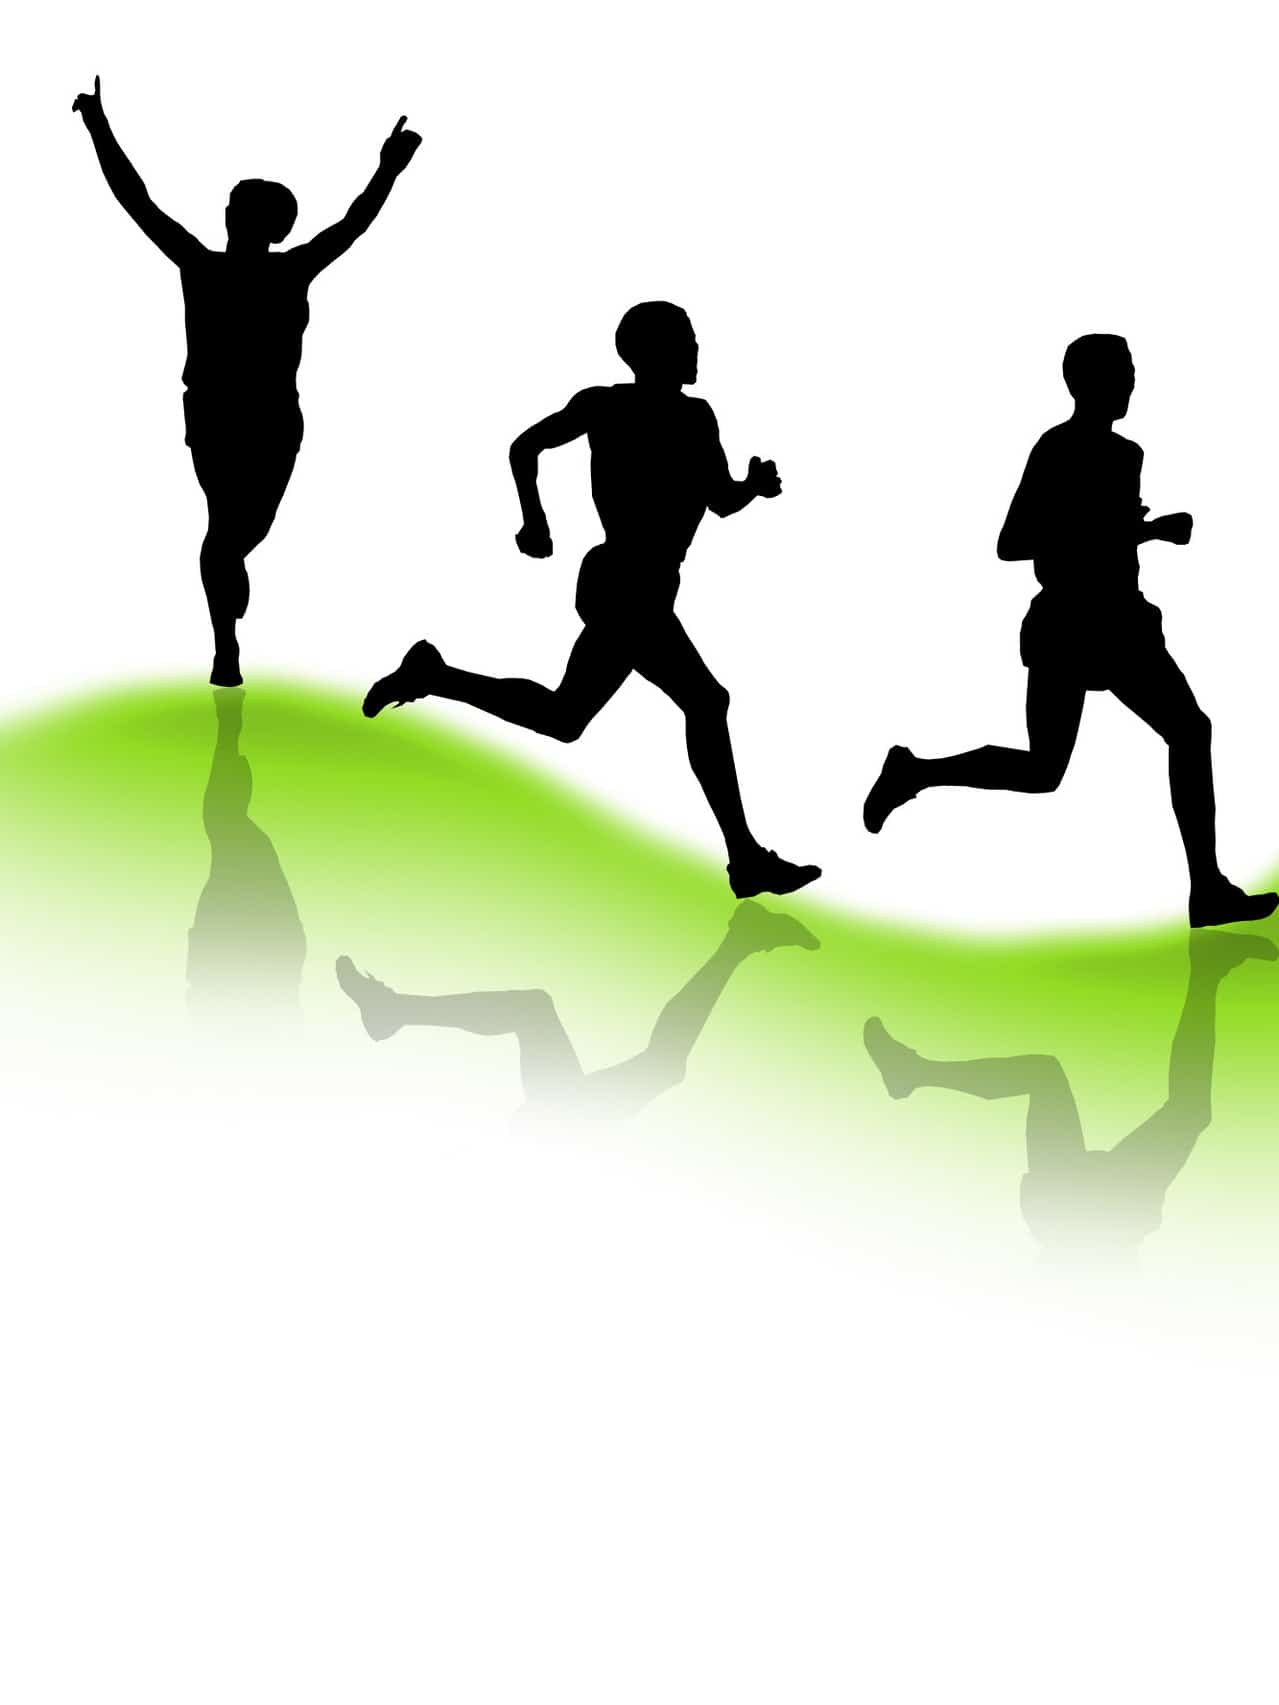 Three silhouettes of people running on a green hill.